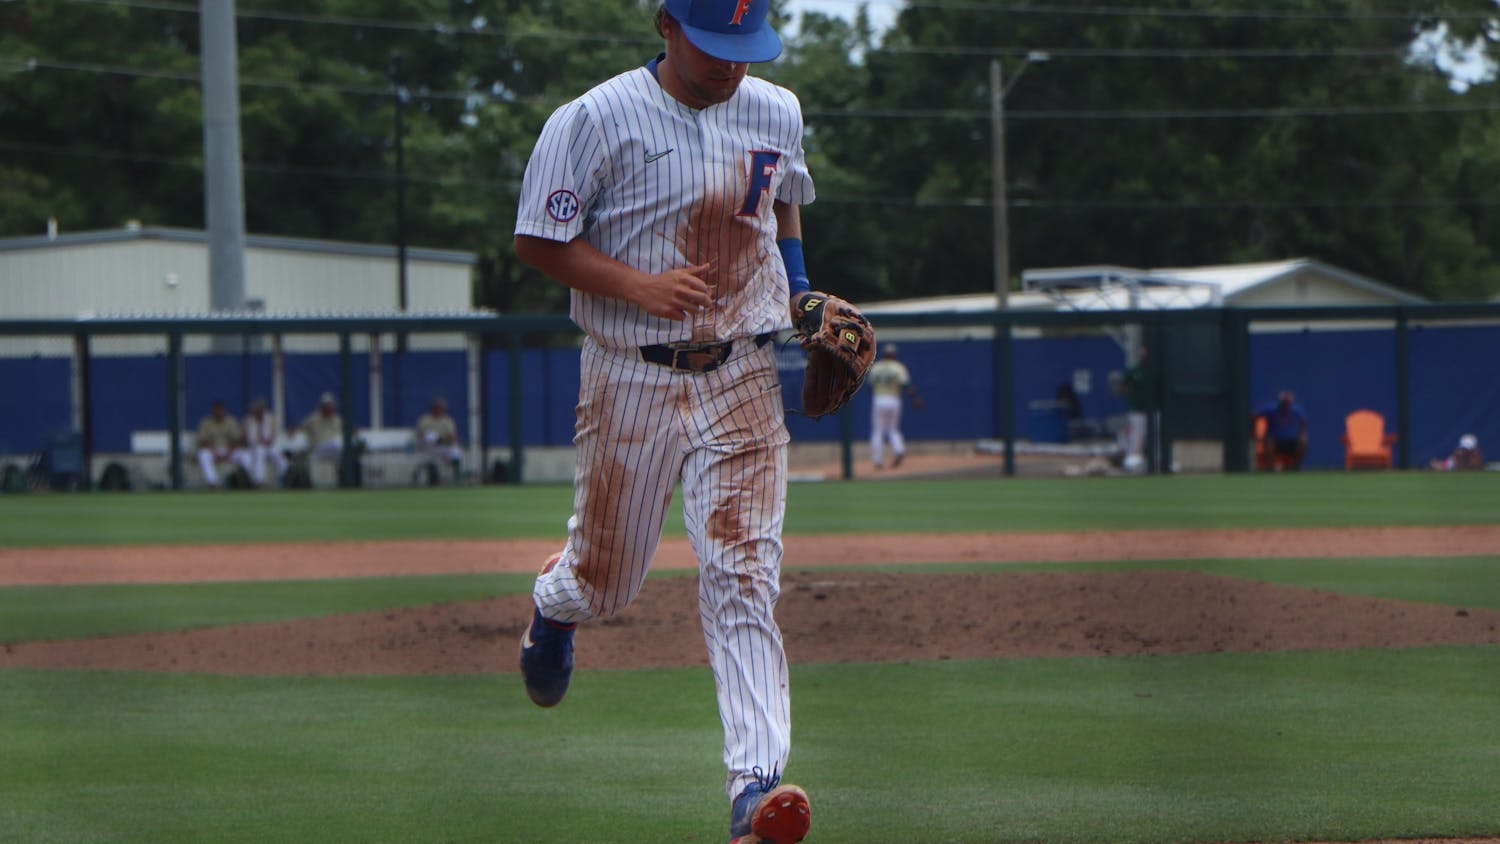 Florida’s Nathan Hickey walks towards the dugout Friday against South Florida. The Gators lost 19-1 against South Alabama Saturday to be swept out of their host regional and end their season.